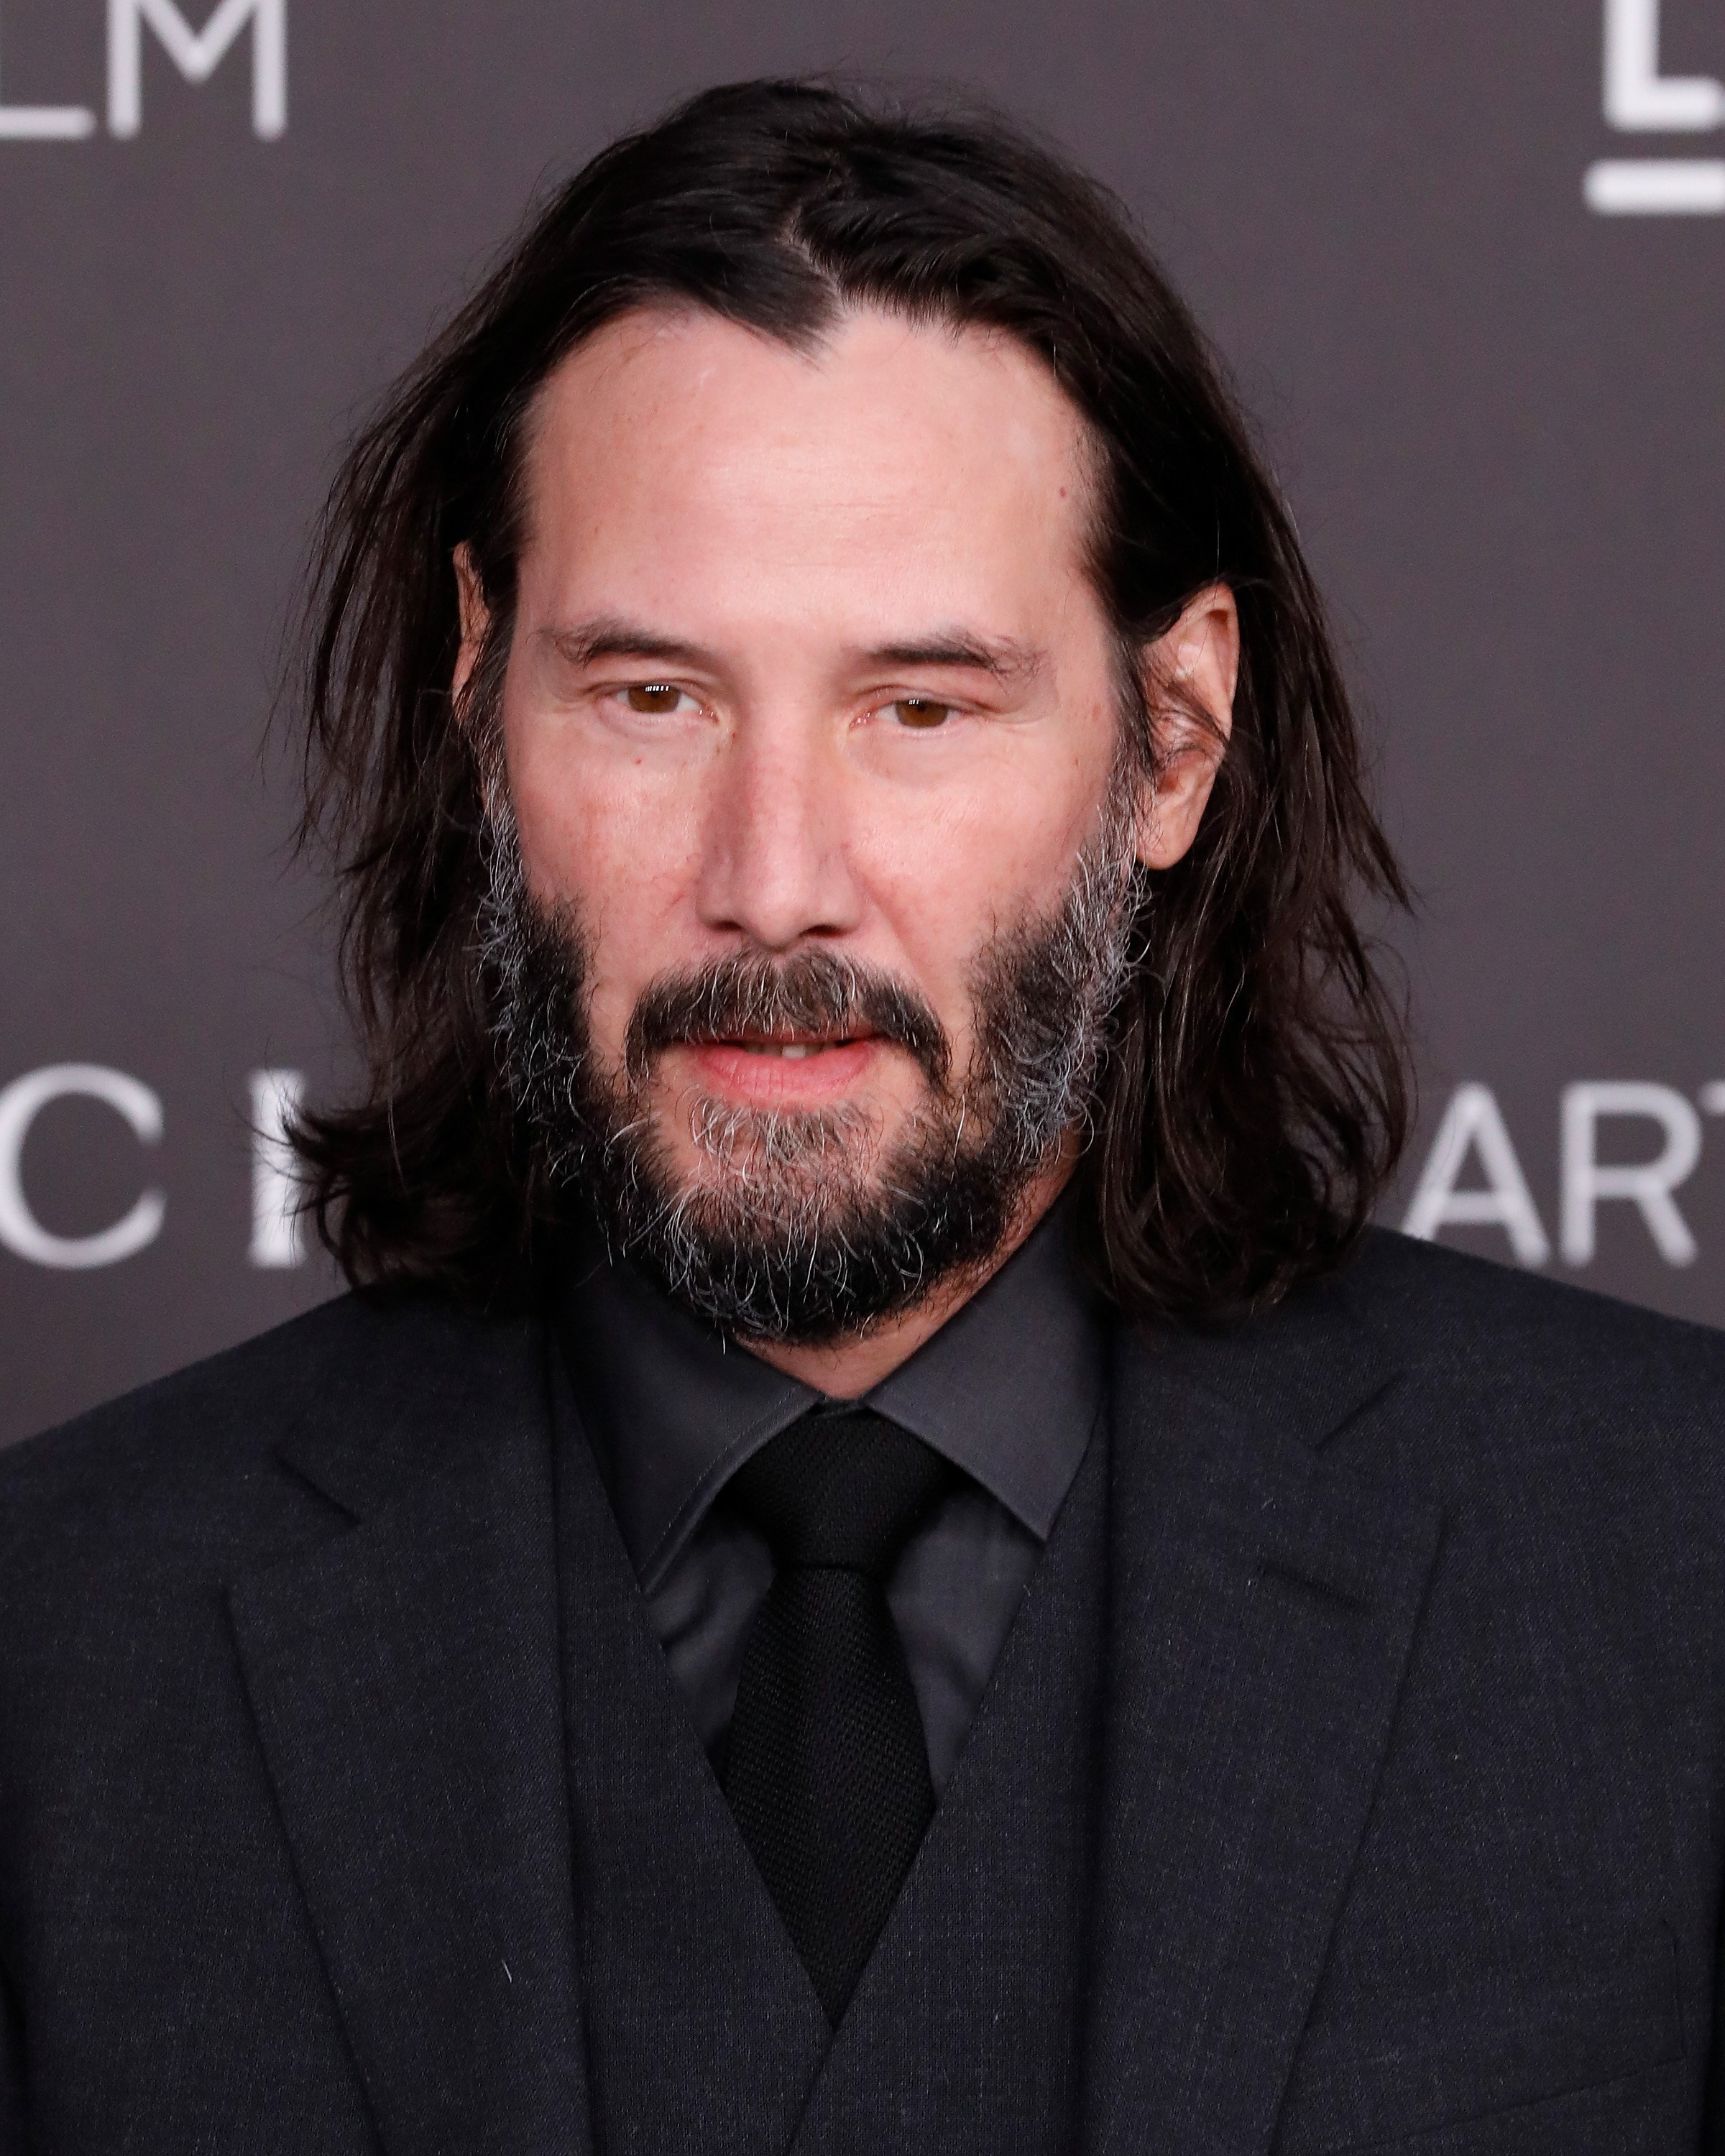 Keanu Reeves, 2019 LACMA Art + Film Gala, 2. November 2019, Los Angeles | Quelle: Getty Images